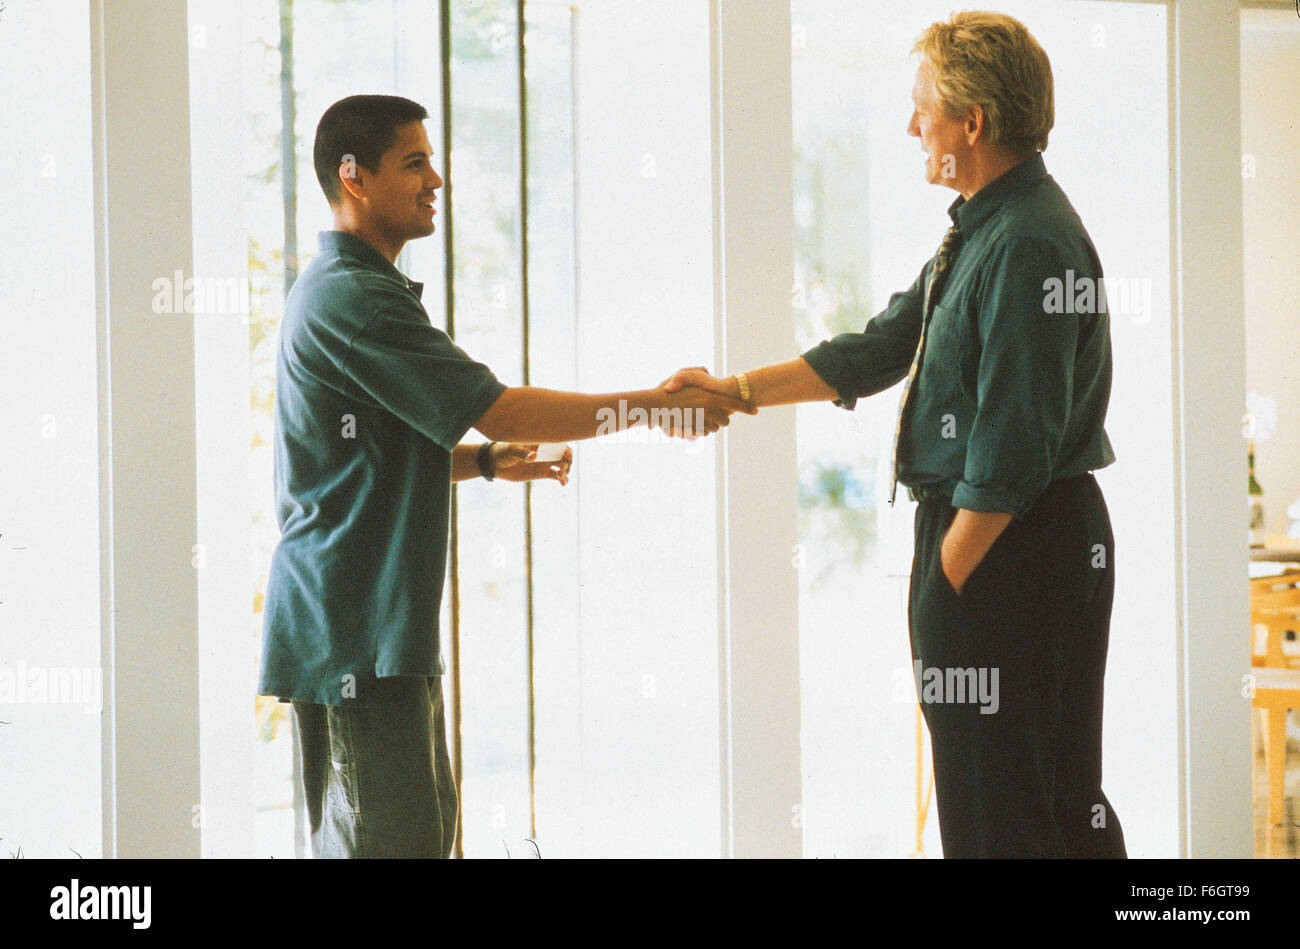 Jun 29, 2001; Los Angeles, CA, USA; Actor JAY HERNANDEZ as Carlos and BRUCE DAVIDSON as Tom Oakley in the Touchstone Pictures romantic drama, 'Crazy Beautiful.' Stock Photo